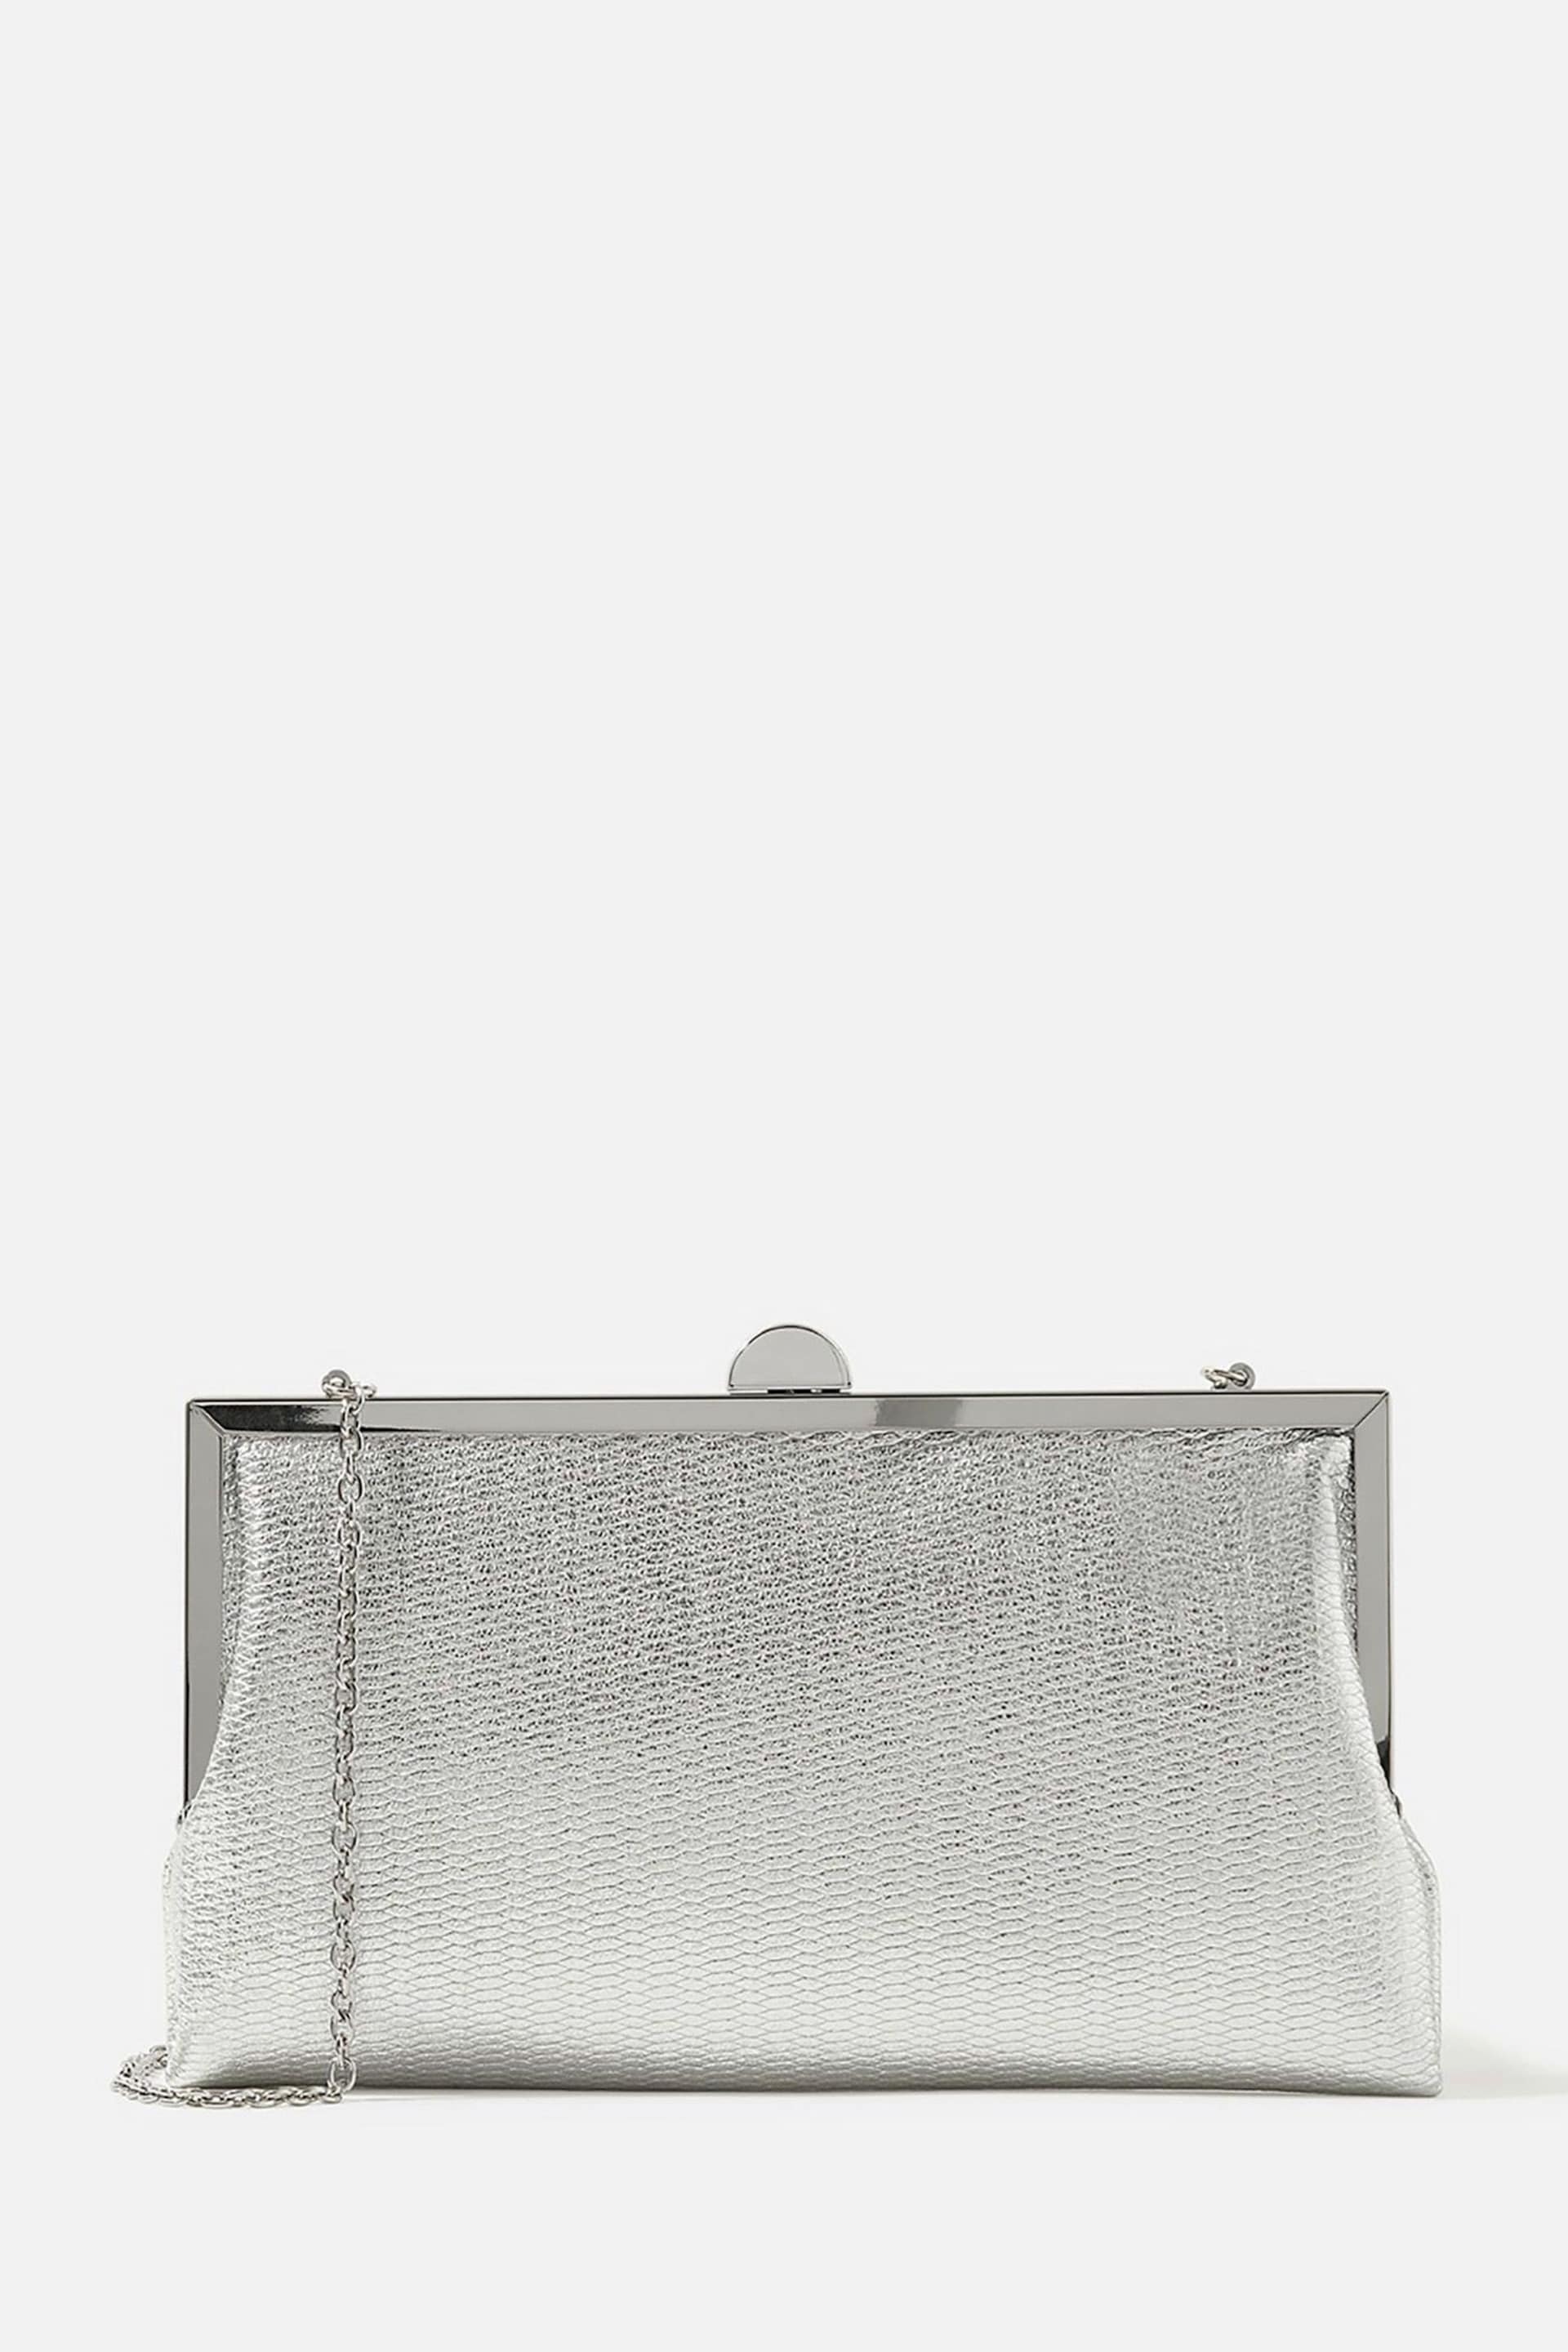 Accessorize Silver Womens Metallic Frame Clutch Bag - Image 2 of 4